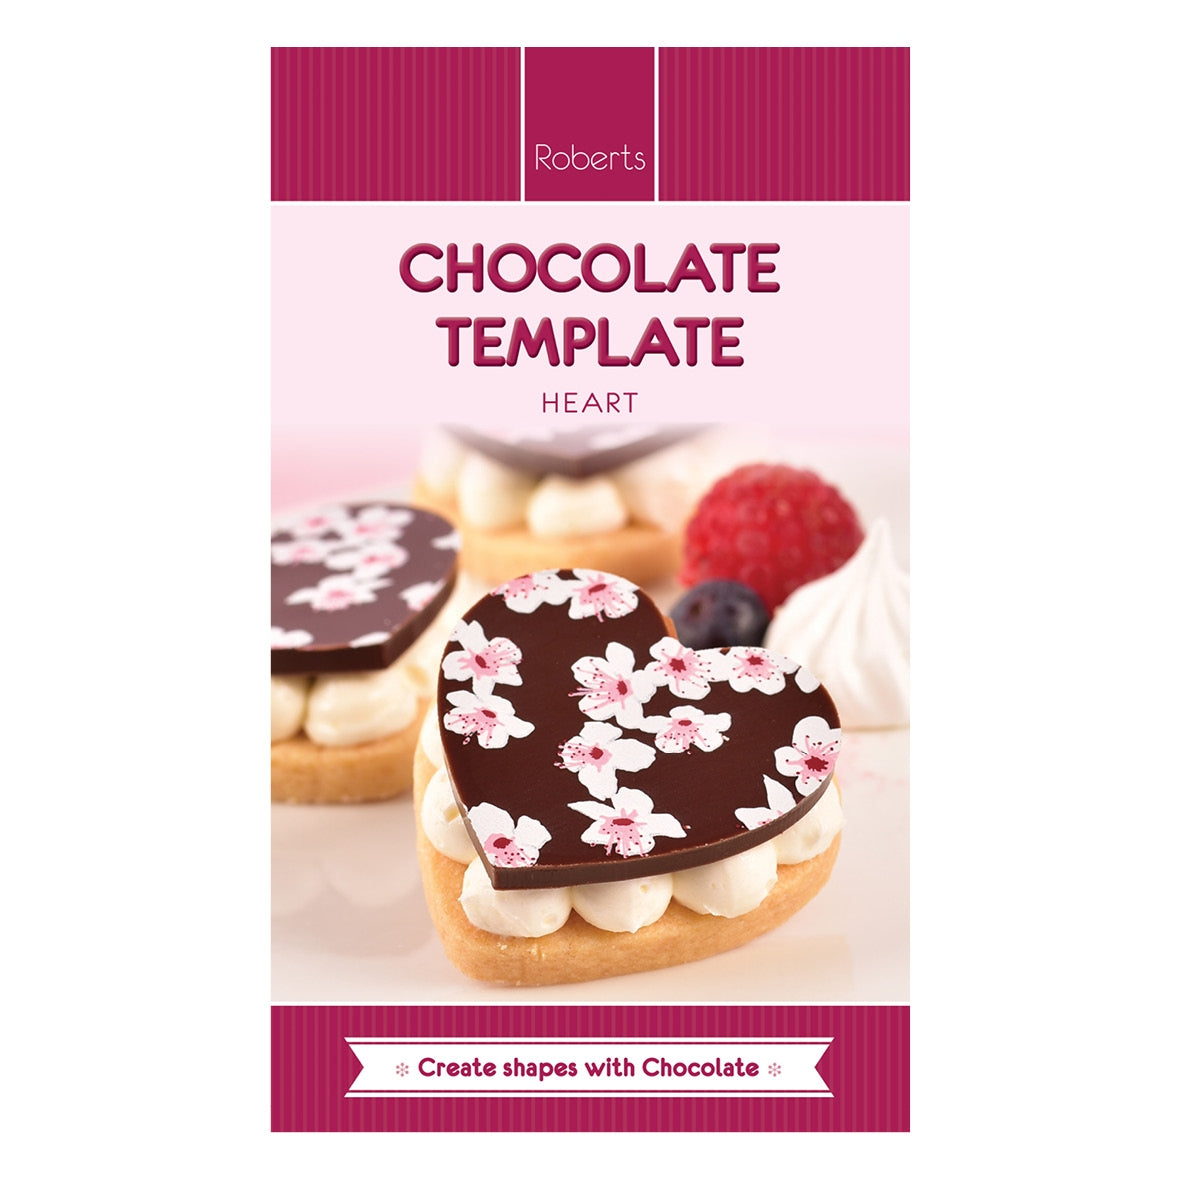 HEART Acrylic Chocolate Template - Cake Decorating Central